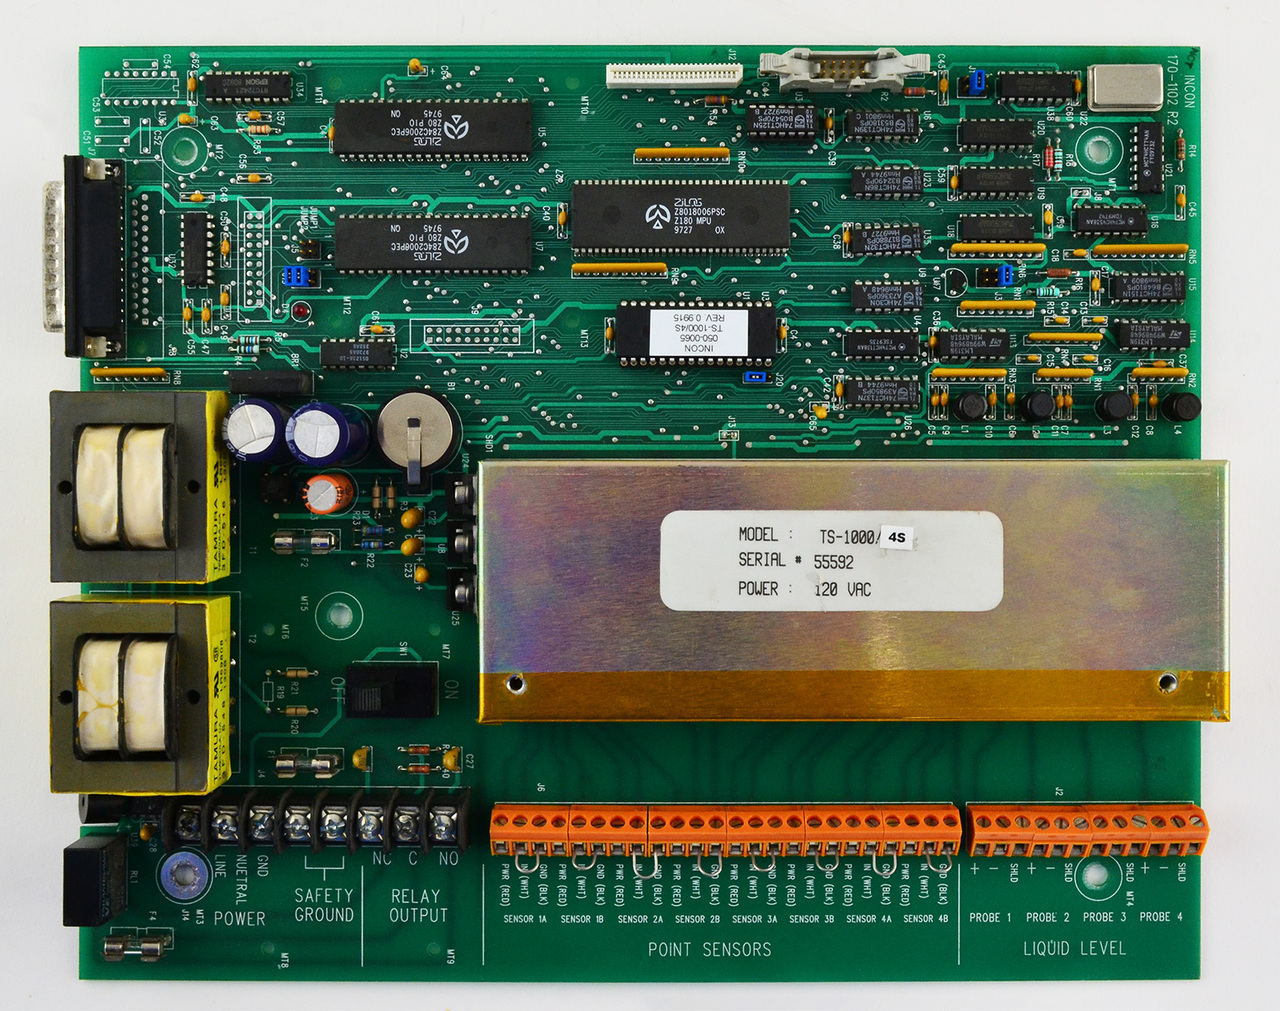 TS-1000 MAIN SYSTEM BOARD, Fits Incon